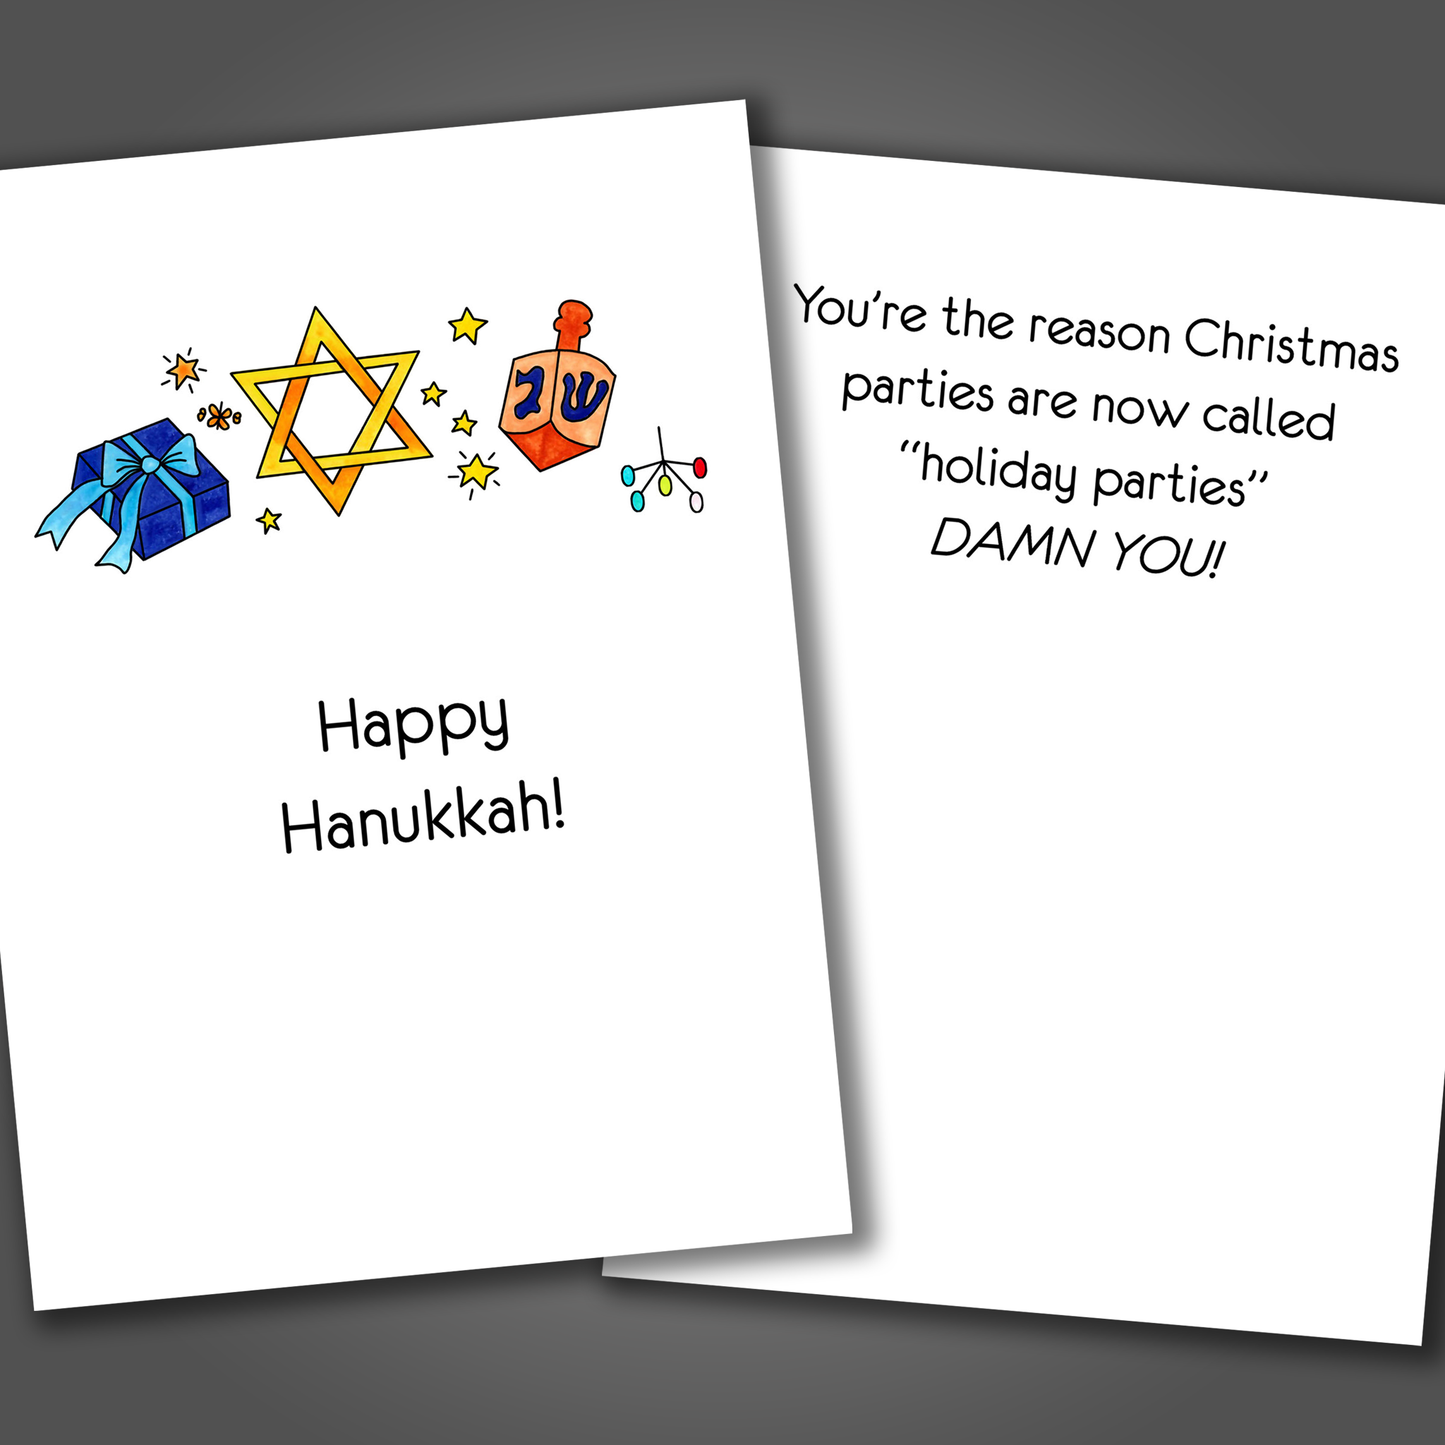 Funny Hanukkah card with a dreidel and start of David drawn on the front of the card. Inside the card is a funny joke that says you're the reason Christmas arties are now called holiday parties!